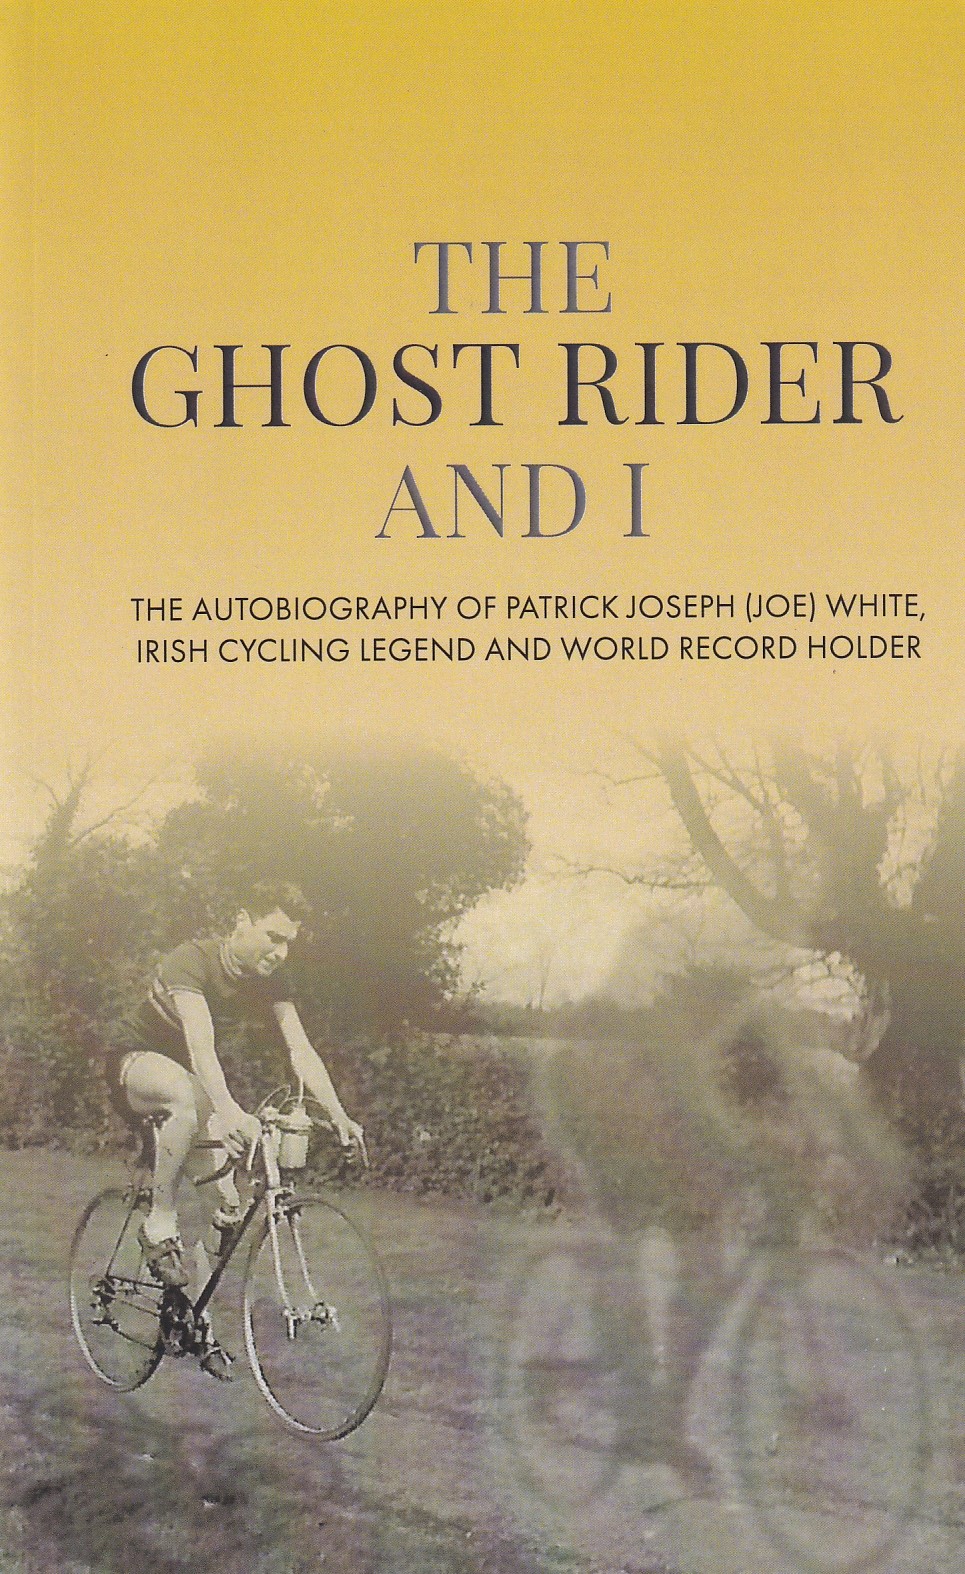 The Ghost Rider and I: The Autobiography of Patrick Joseph (Joe) White, Irish Cycling Legend and World Record Holder | Patrick Joseph White | Charlie Byrne's